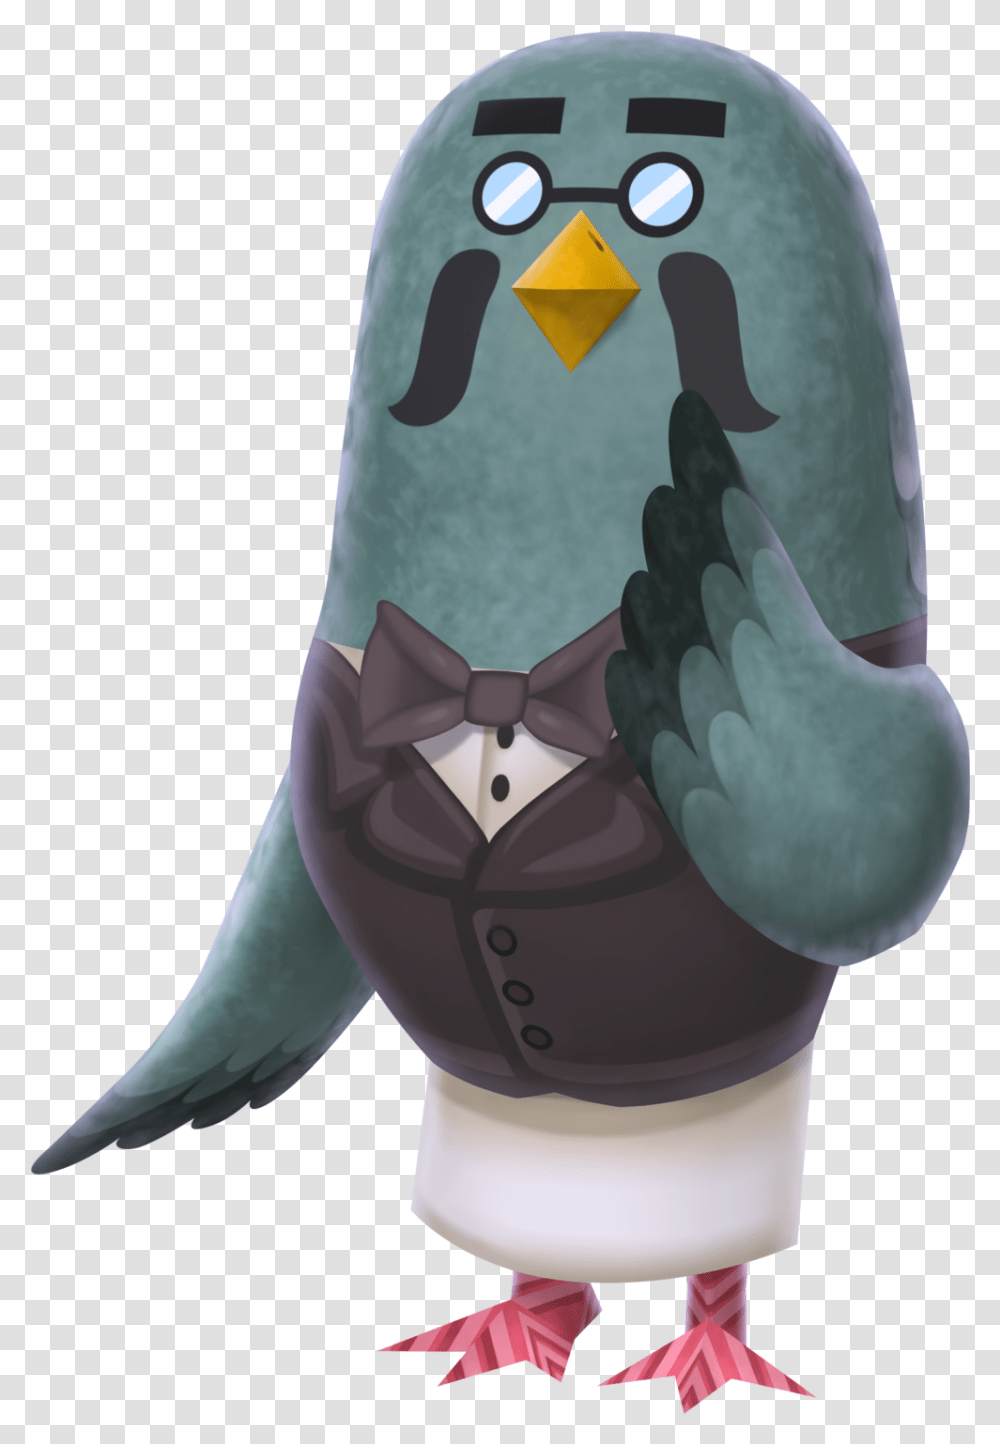 Animal Crossing New Horizons' Brewster Cafe Dialogue Hints Brewster Animal Crossing New Horizons, Bird, Person, Art, Jay Transparent Png